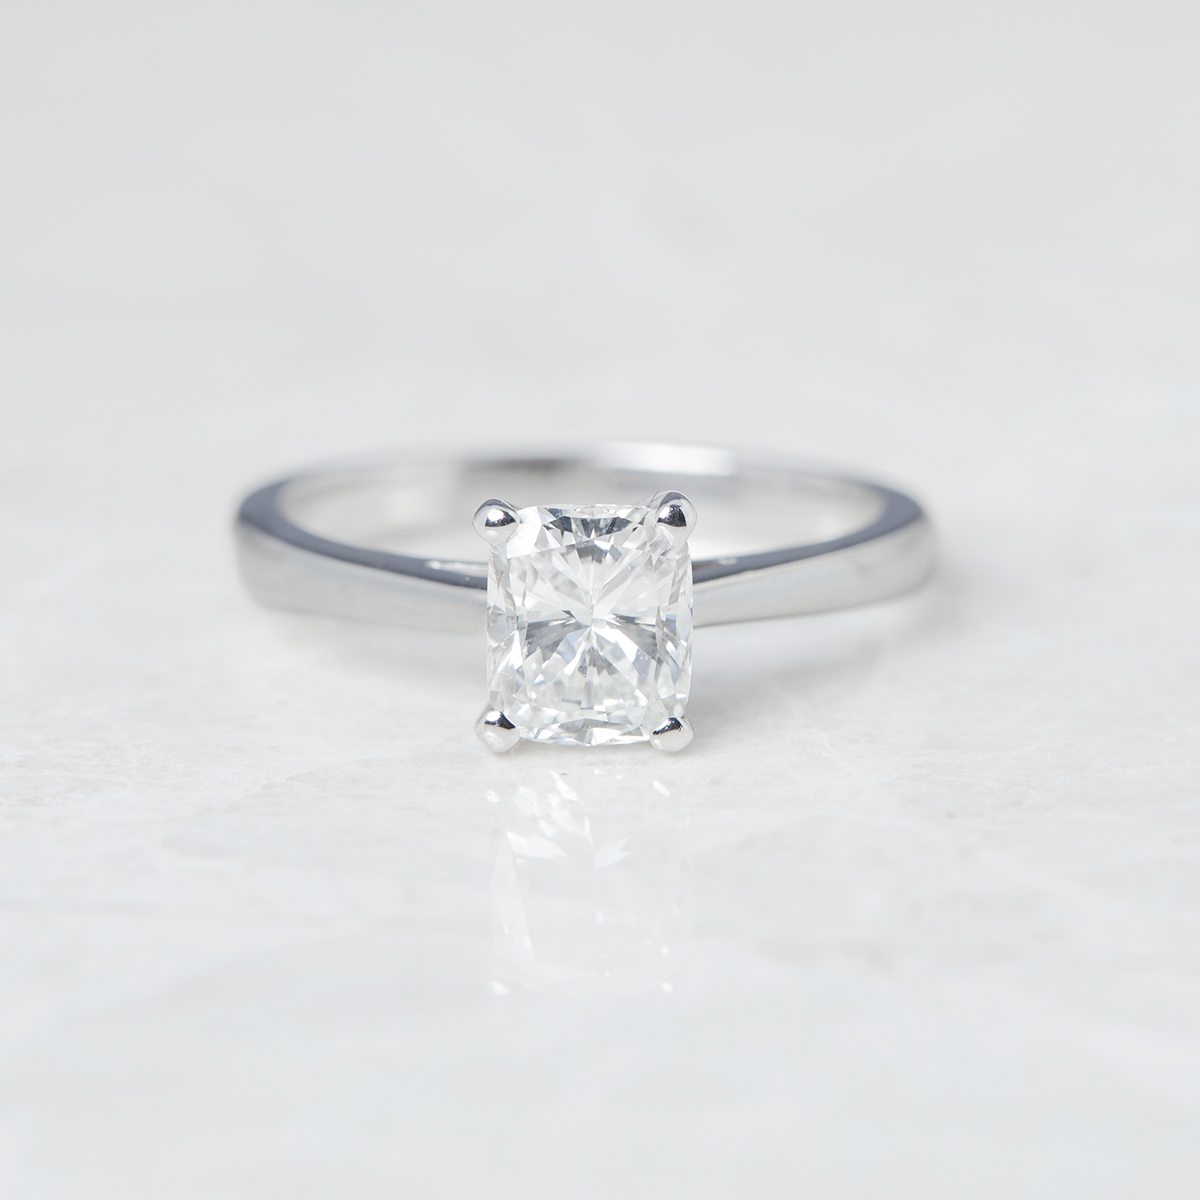 Unbranded 18k White Gold Cushion Cut 1.03ct Diamond Ring - Image 2 of 6